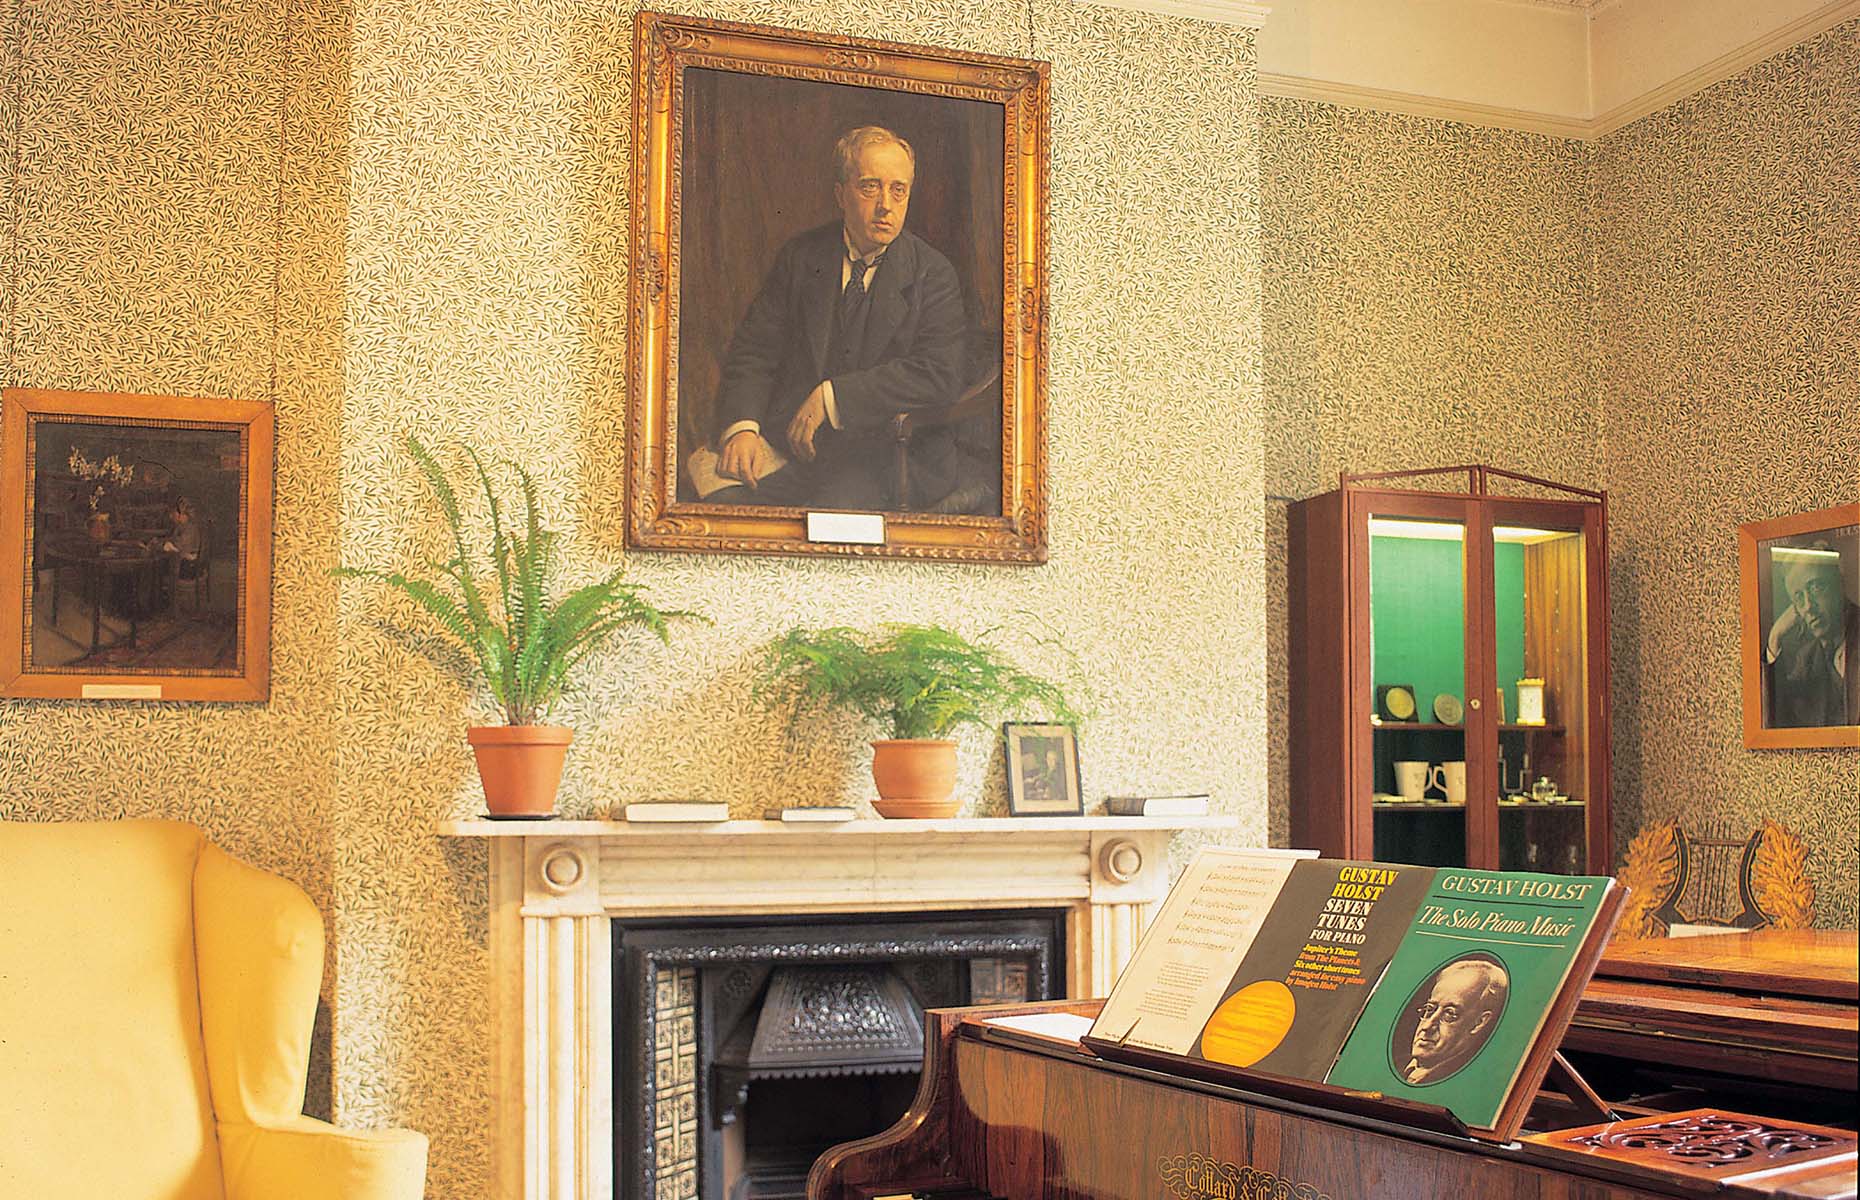 Holst Victorian House piano room (Image: Courtesy of Holst Victorian House)